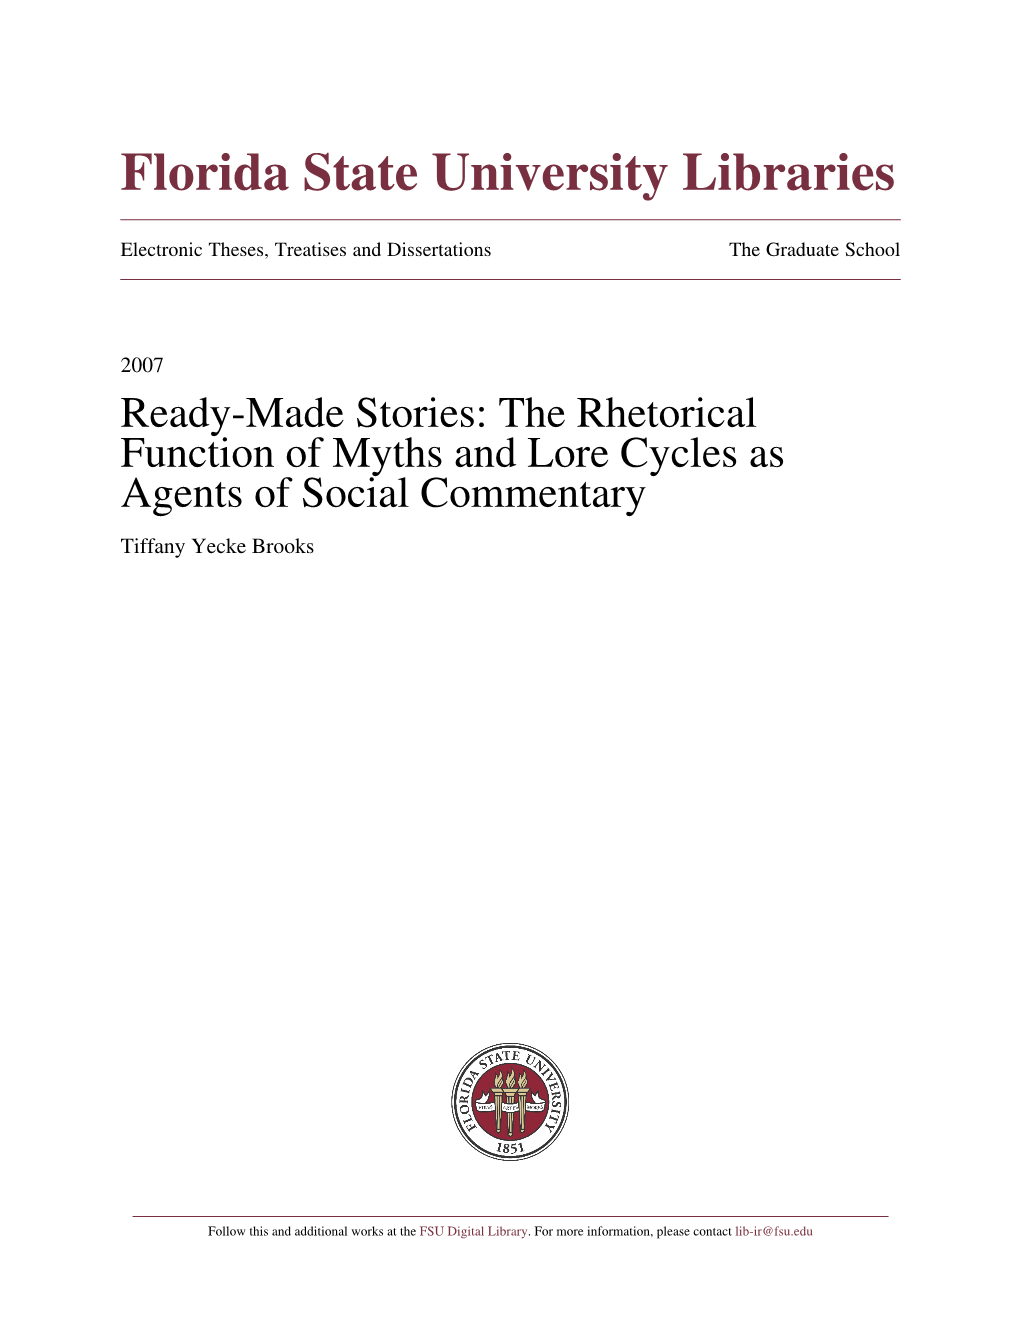 Ready-Made Stories: the Rhetorical Function of Myths and Lore Cycles As Agents of Social Commentary Tiffany Yecke Brooks